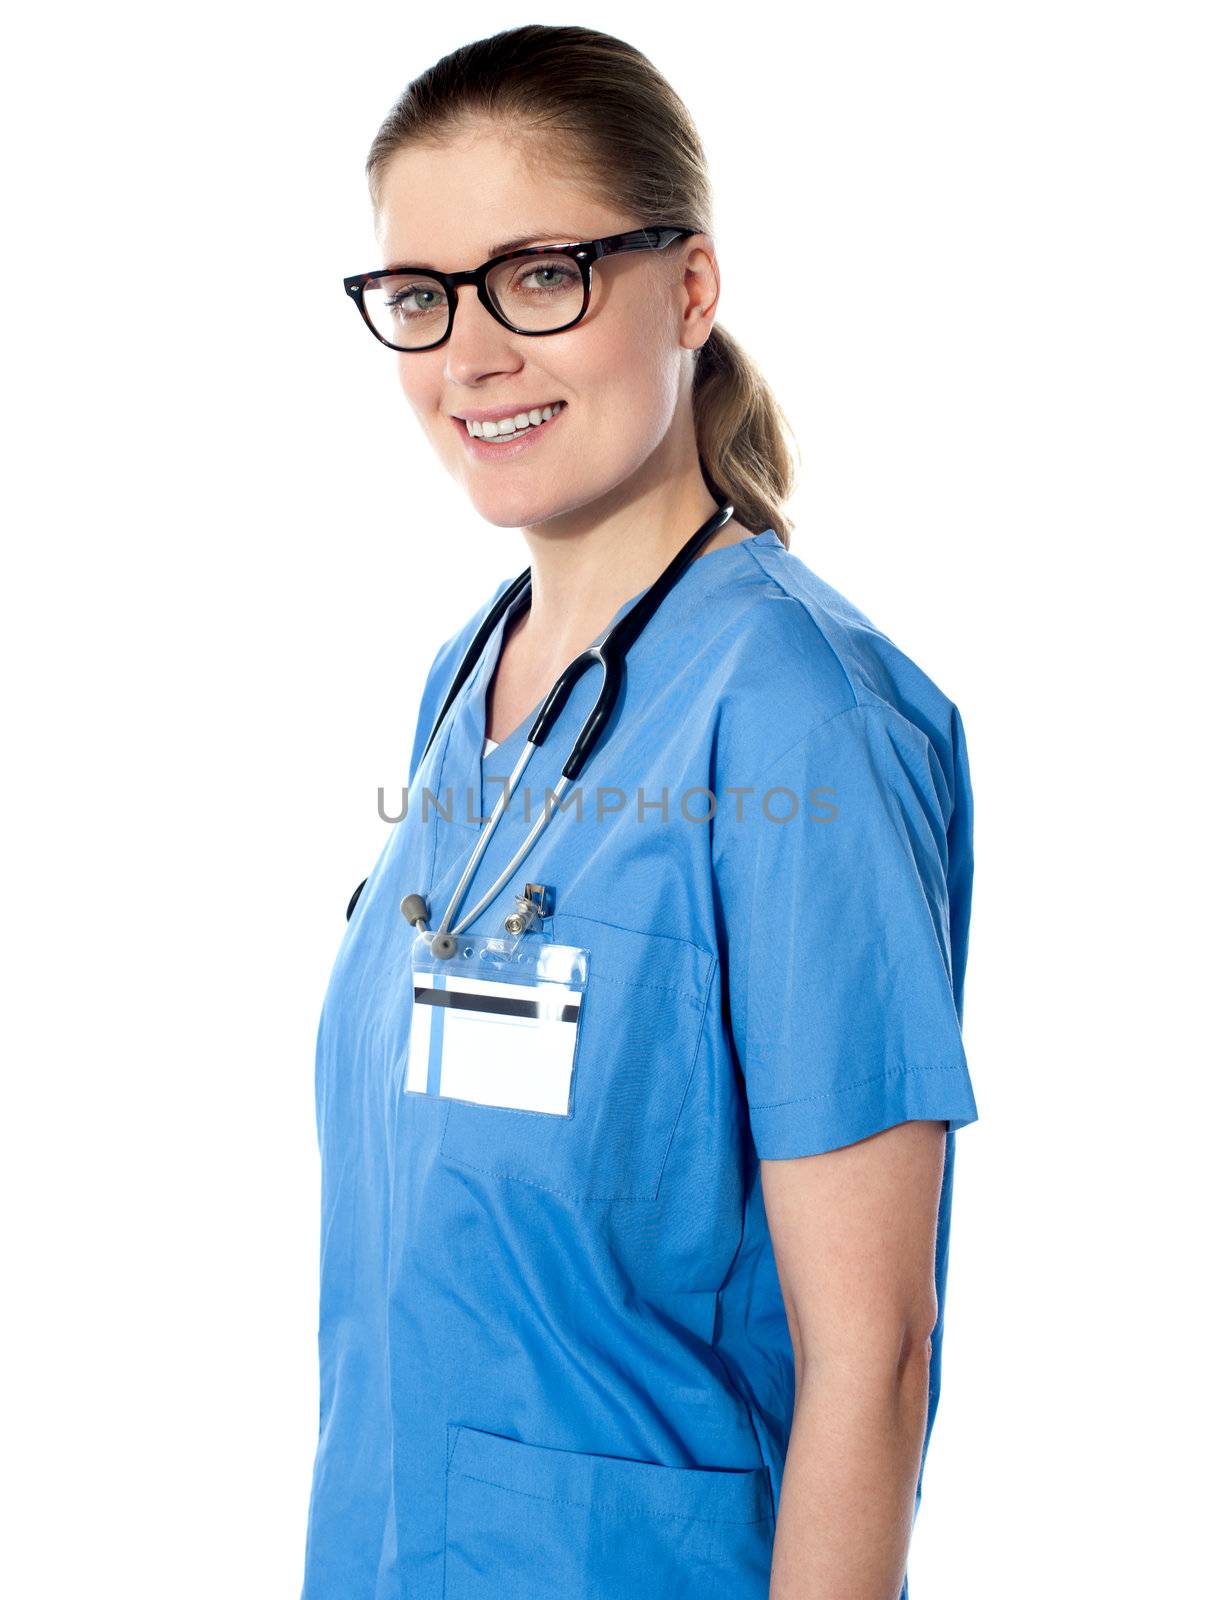 Image of an exprienced physician by stockyimages